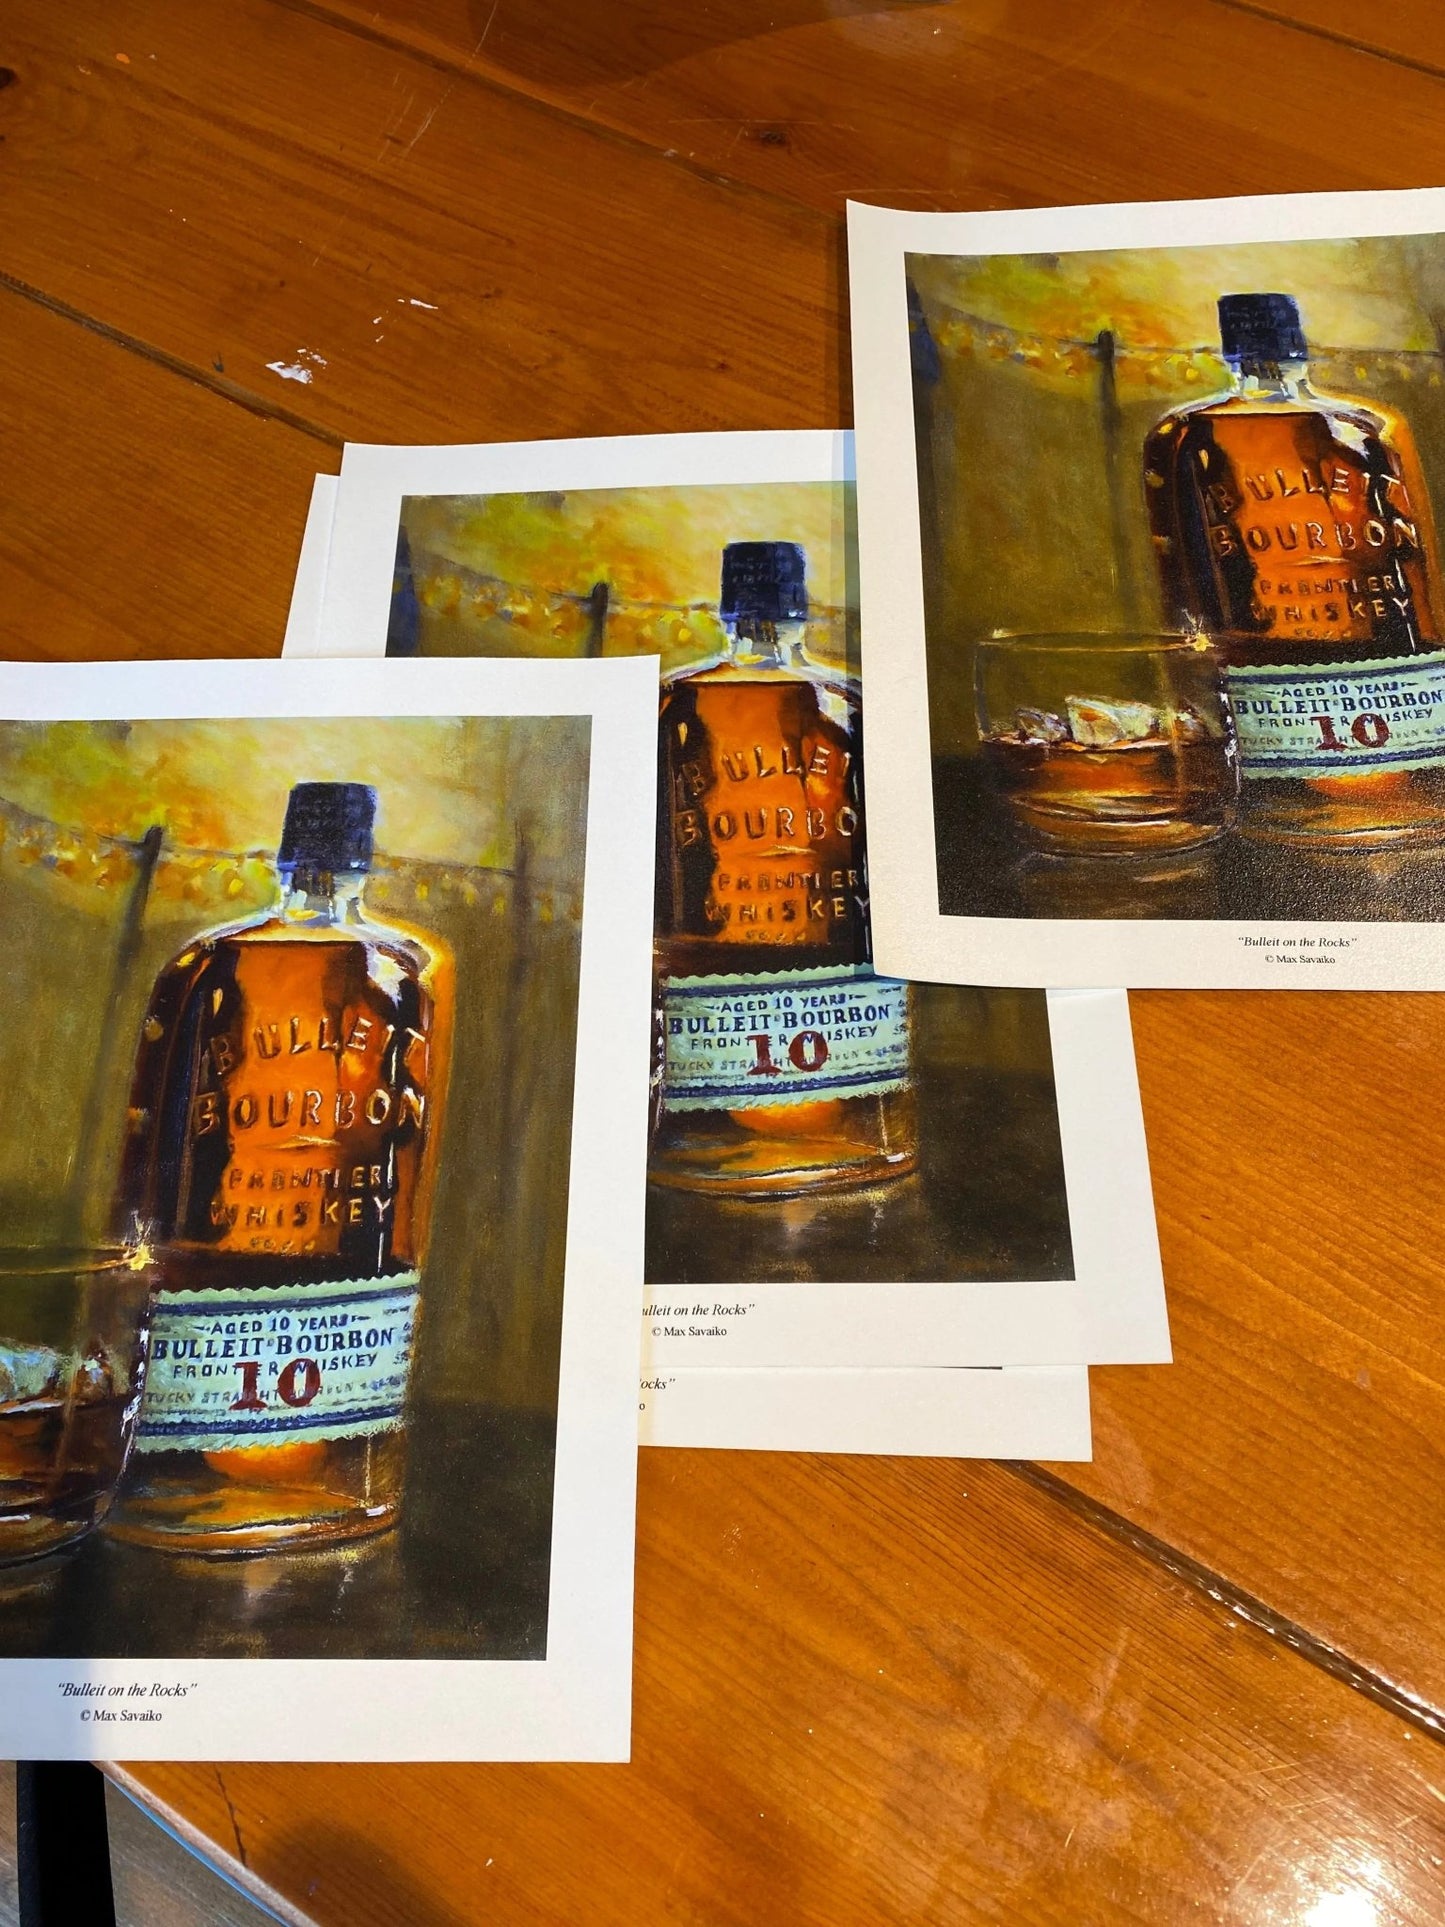 Limited Edition Print - Bulleit Bourbon Whiskey on the Rocks Granite